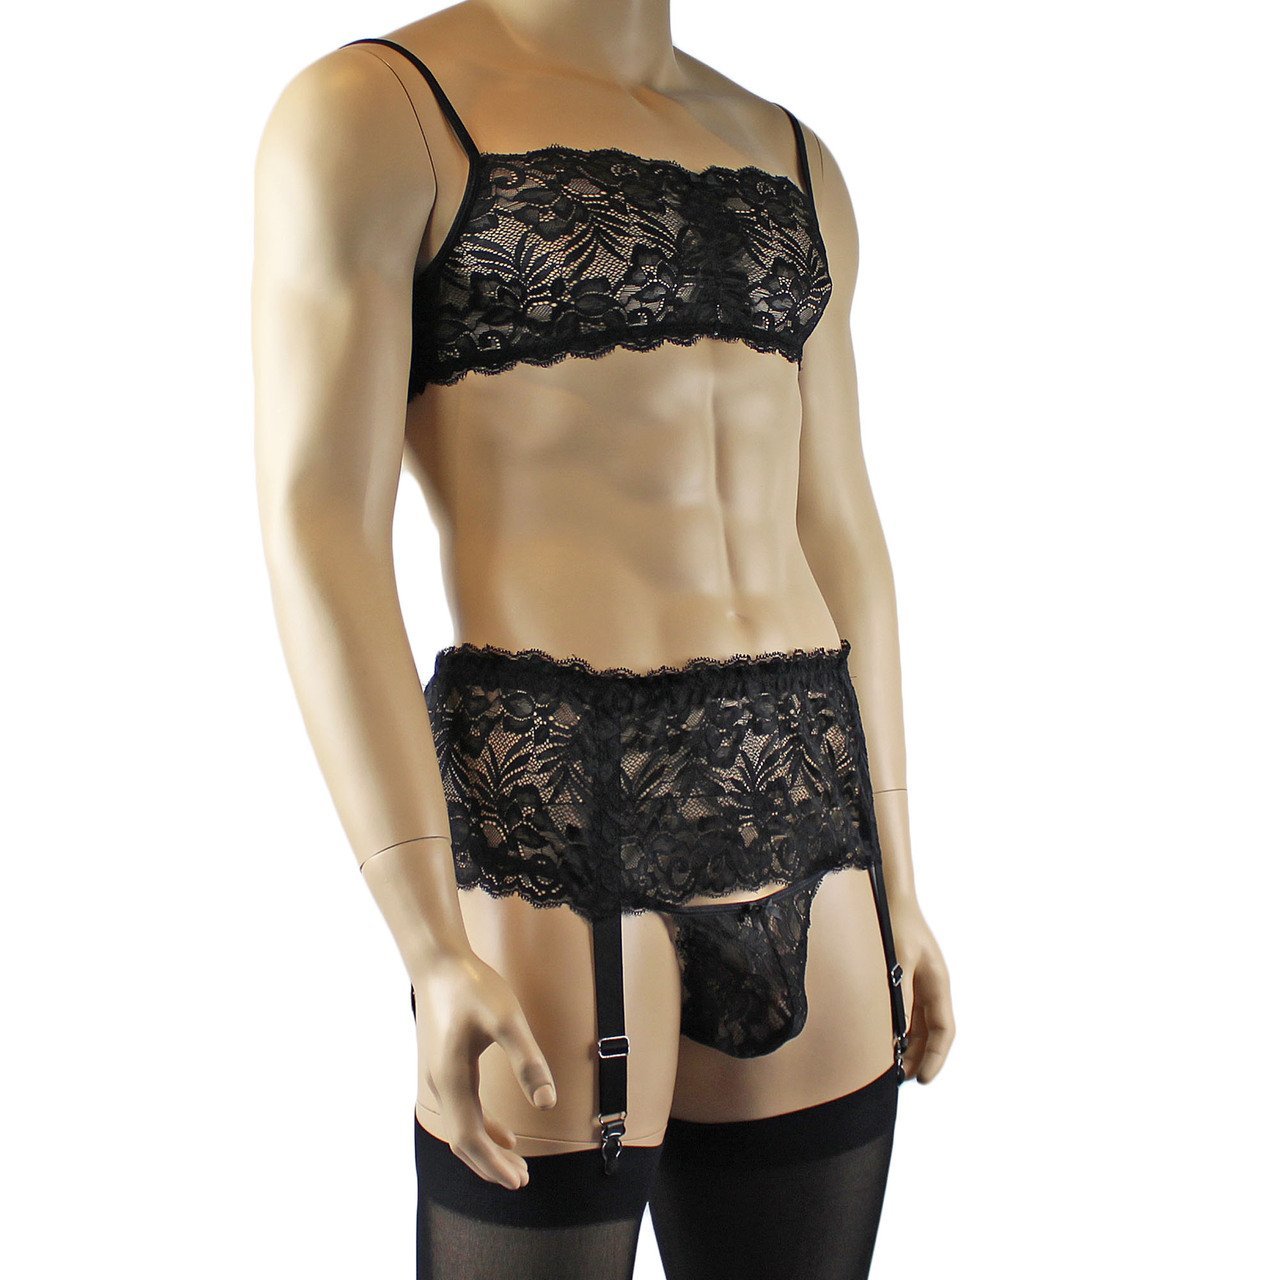 Mens Sexy Lace Bra, Pouch G string, Garterbelt & Stockings (black plus other colours)